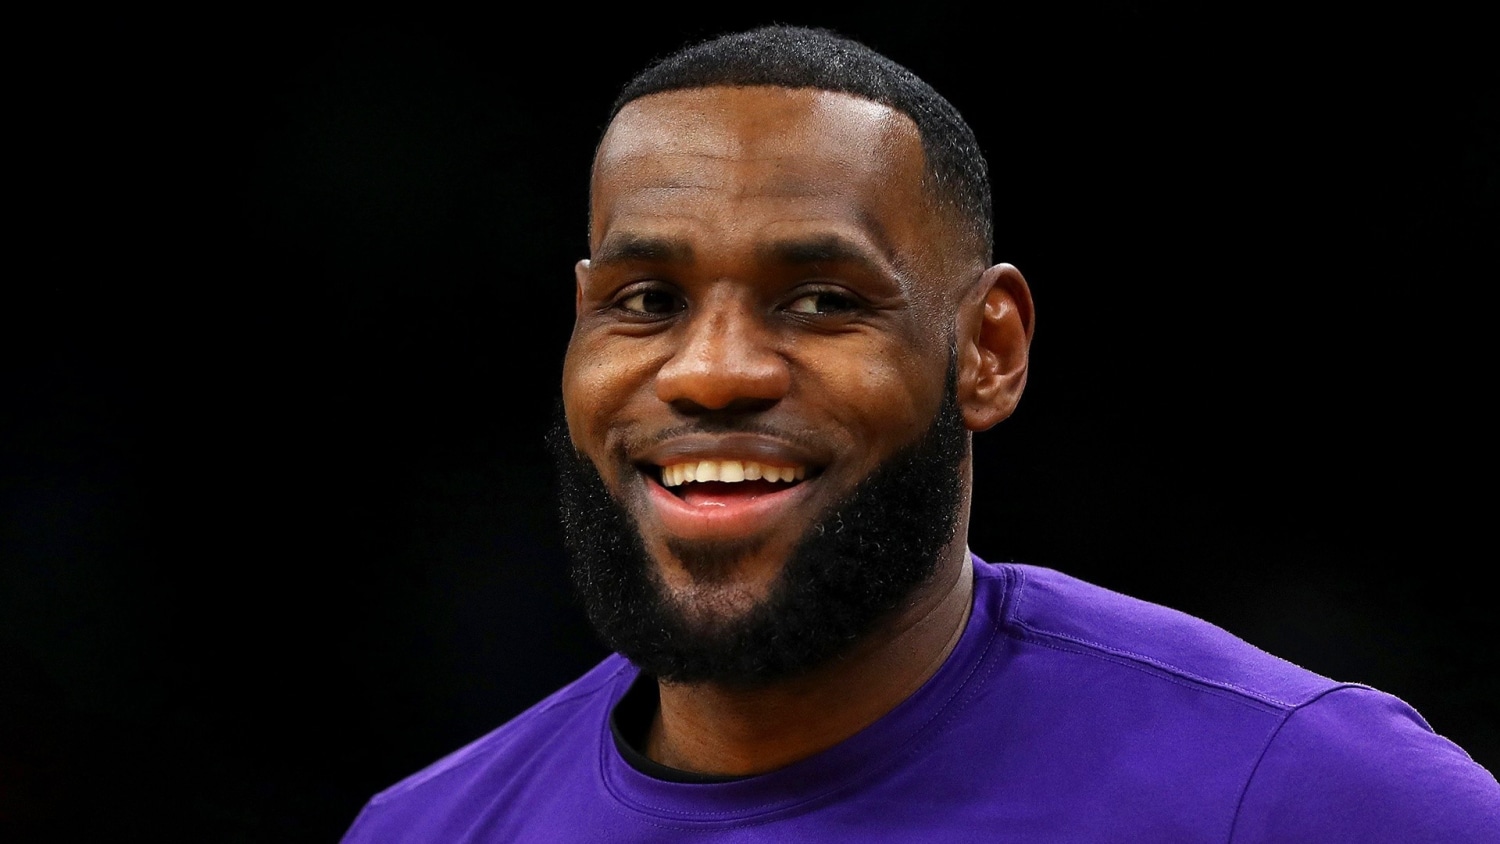 Reactions to LeBron James' new bald look - AS USA